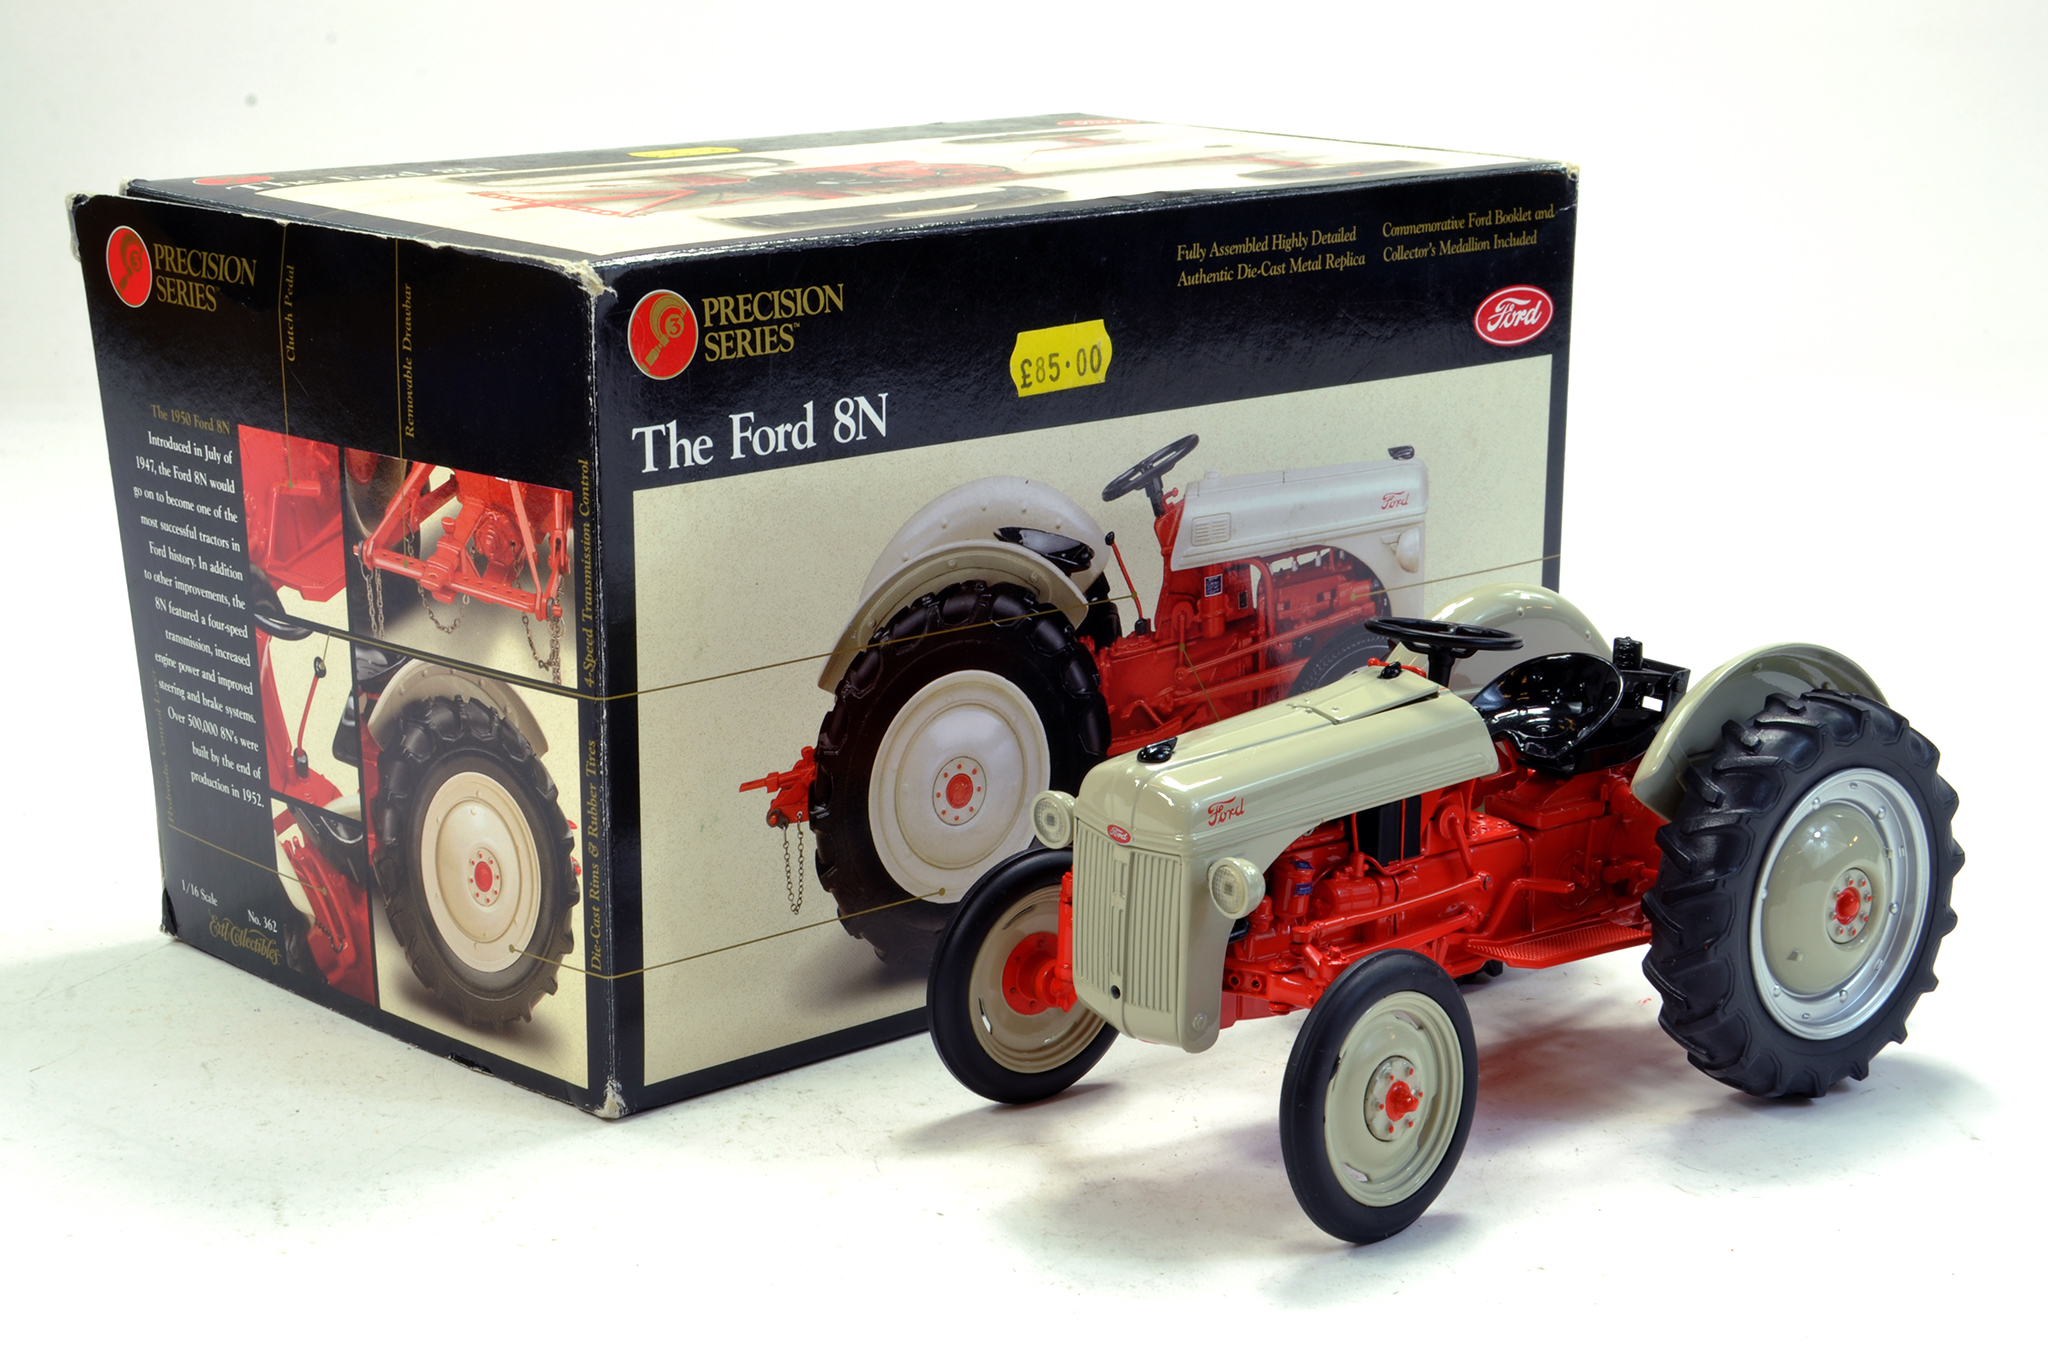 Ertl 1/16 Precision Series Ford 8N Tractor. Includes Medal but no paperwork. Displays Excellently